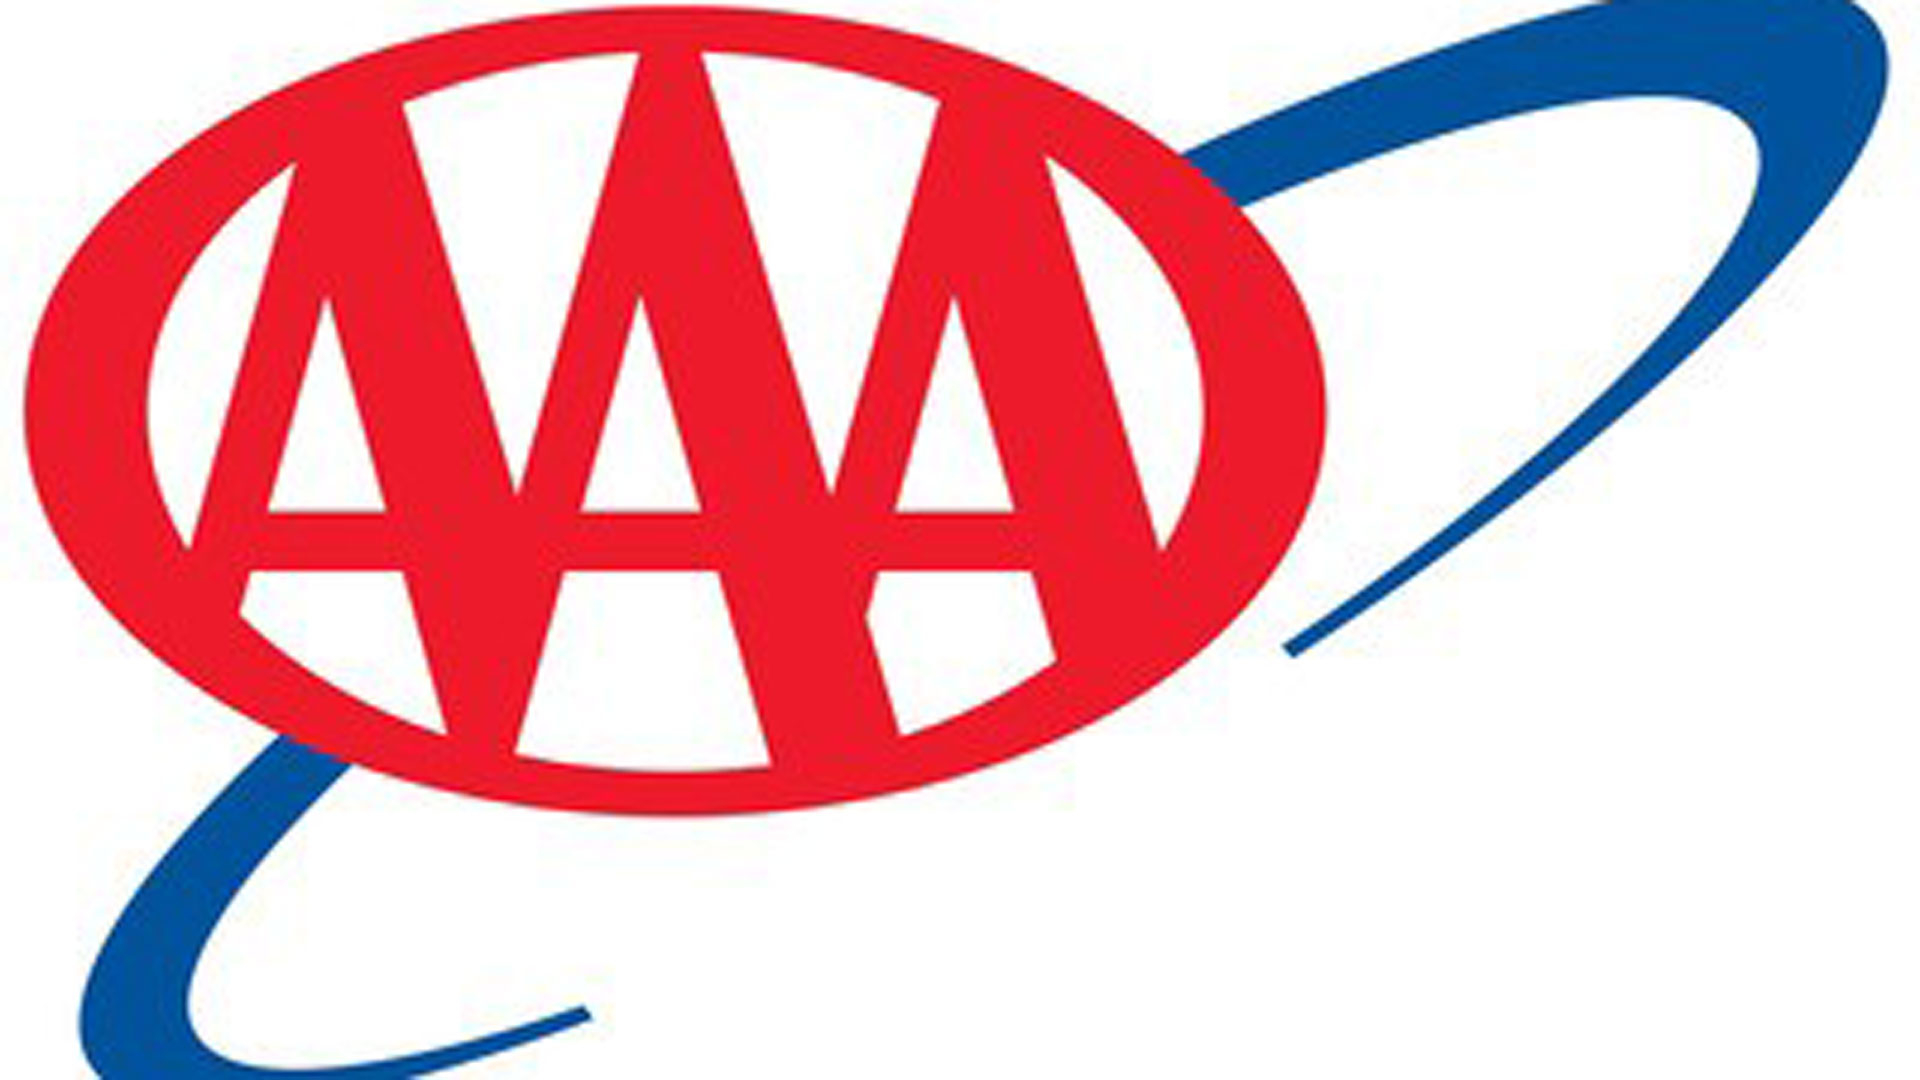 Aaa Announces 125 Million In Relief For Auto Insurance inside proportions 1920 X 1080